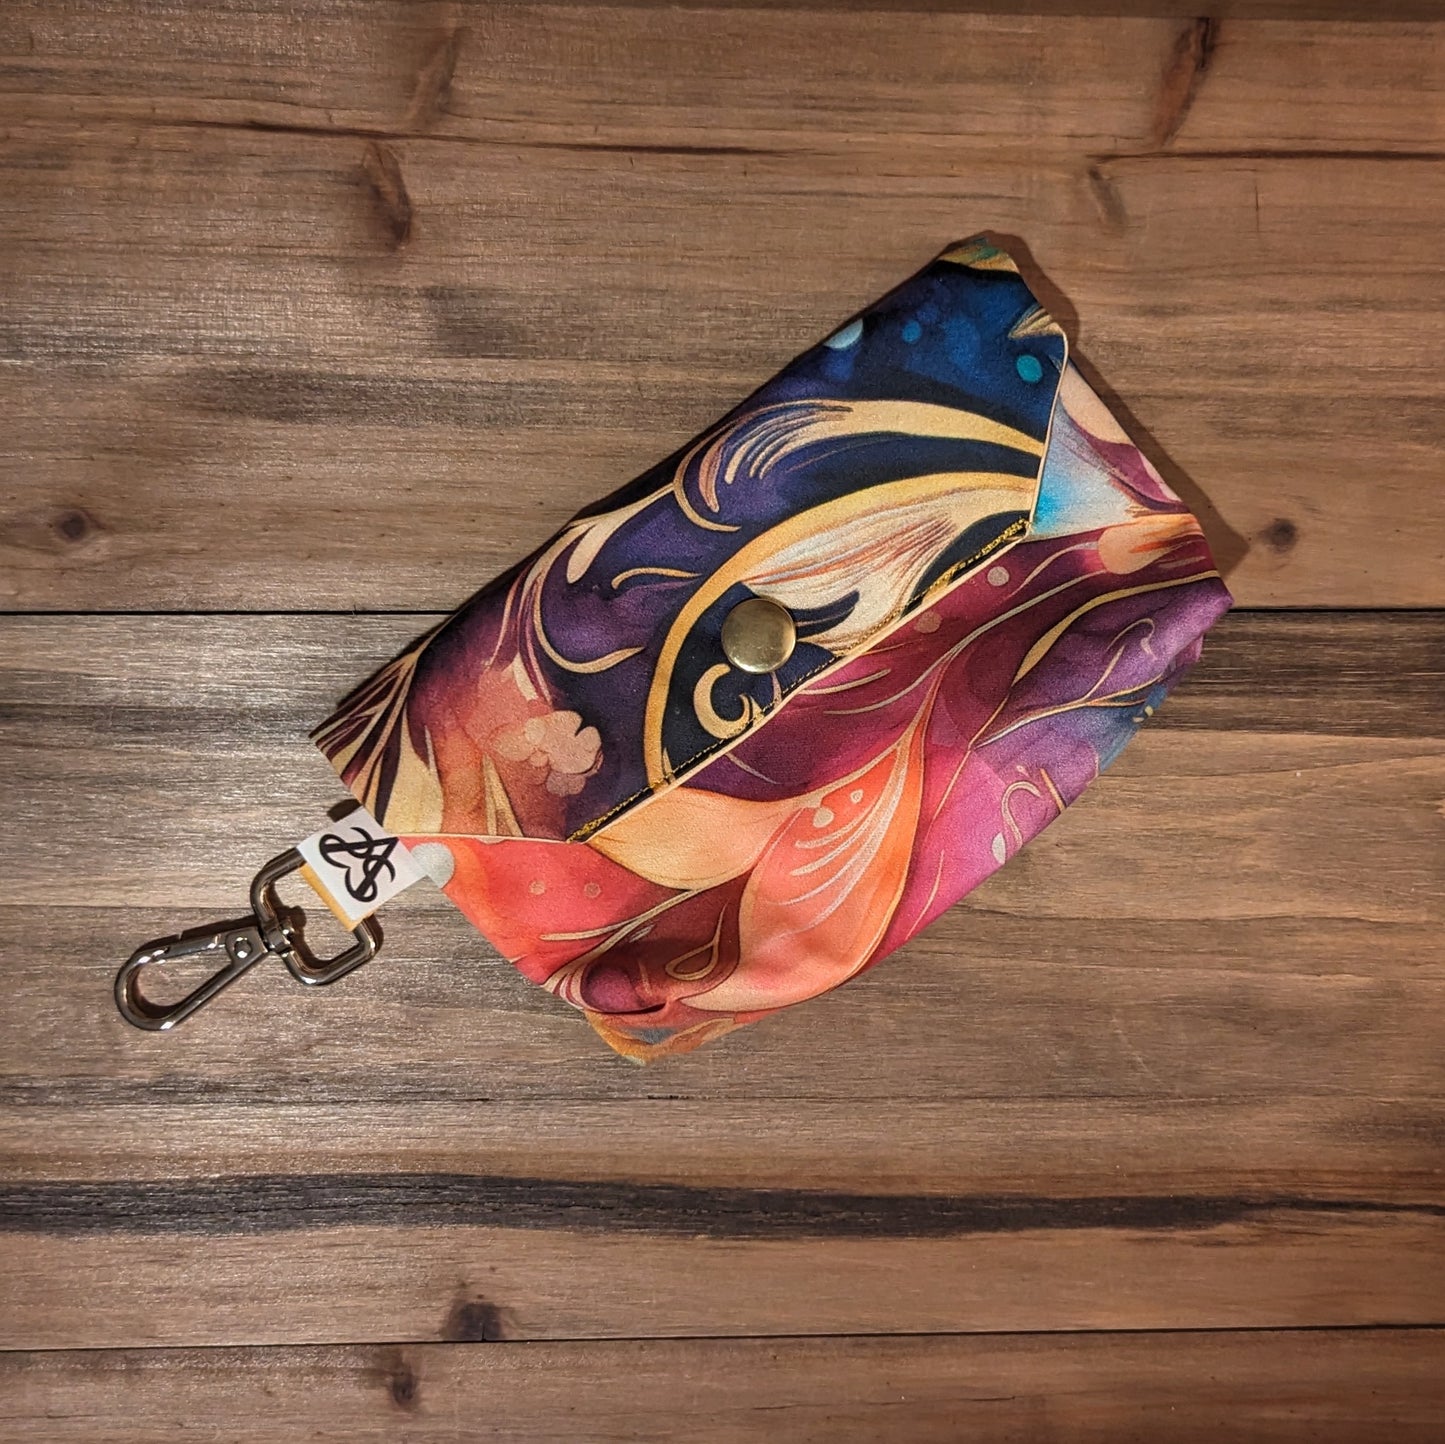 A bright tarot card case with swirling pinks, oranges, blues, purple, and gold outside, a keychain clip, and a gold snap close.